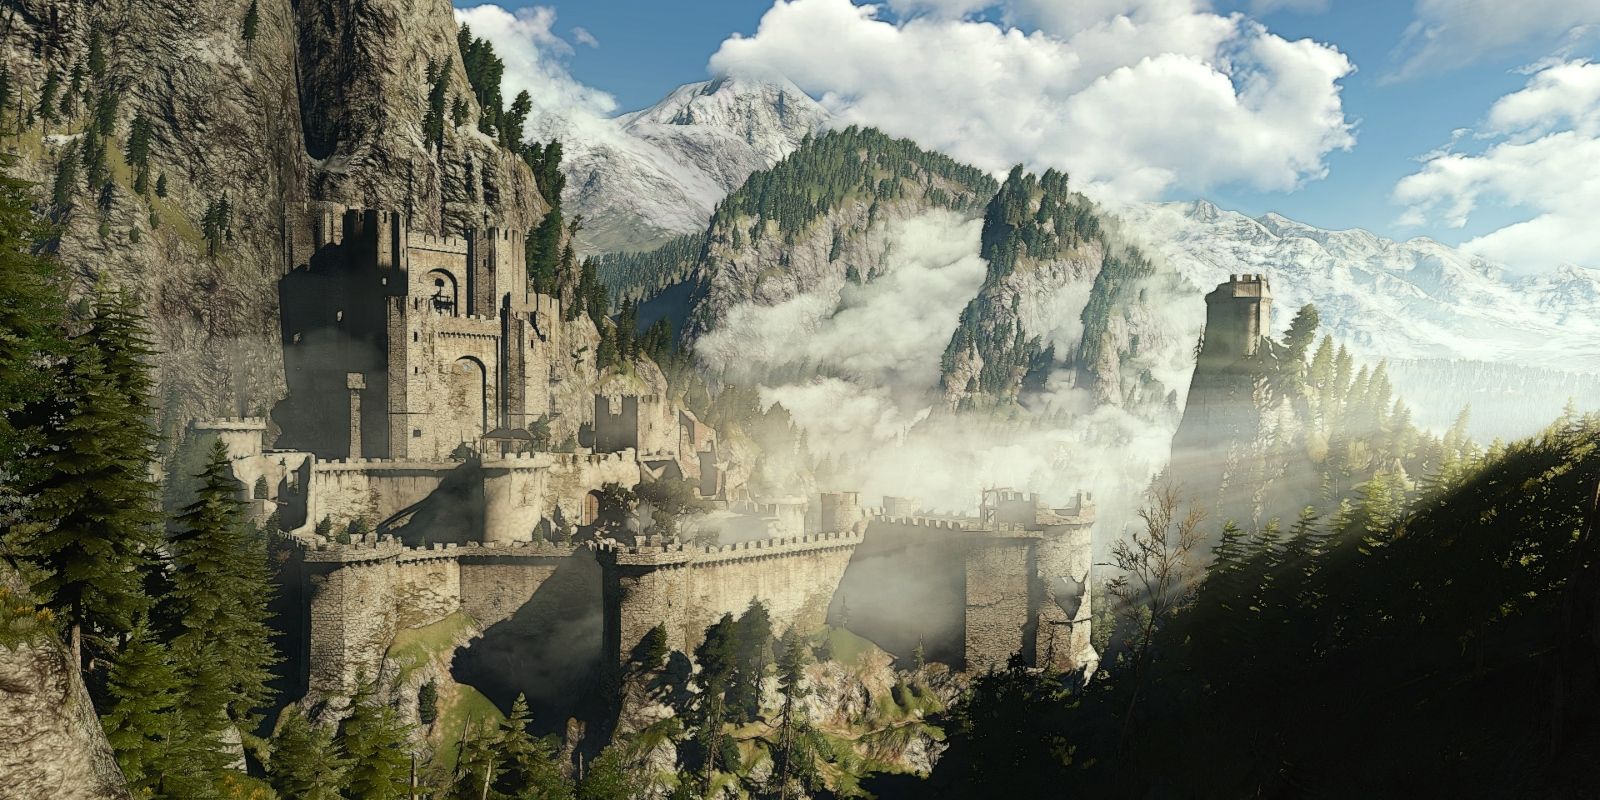 A view of the valley where Kaer Morhen is found